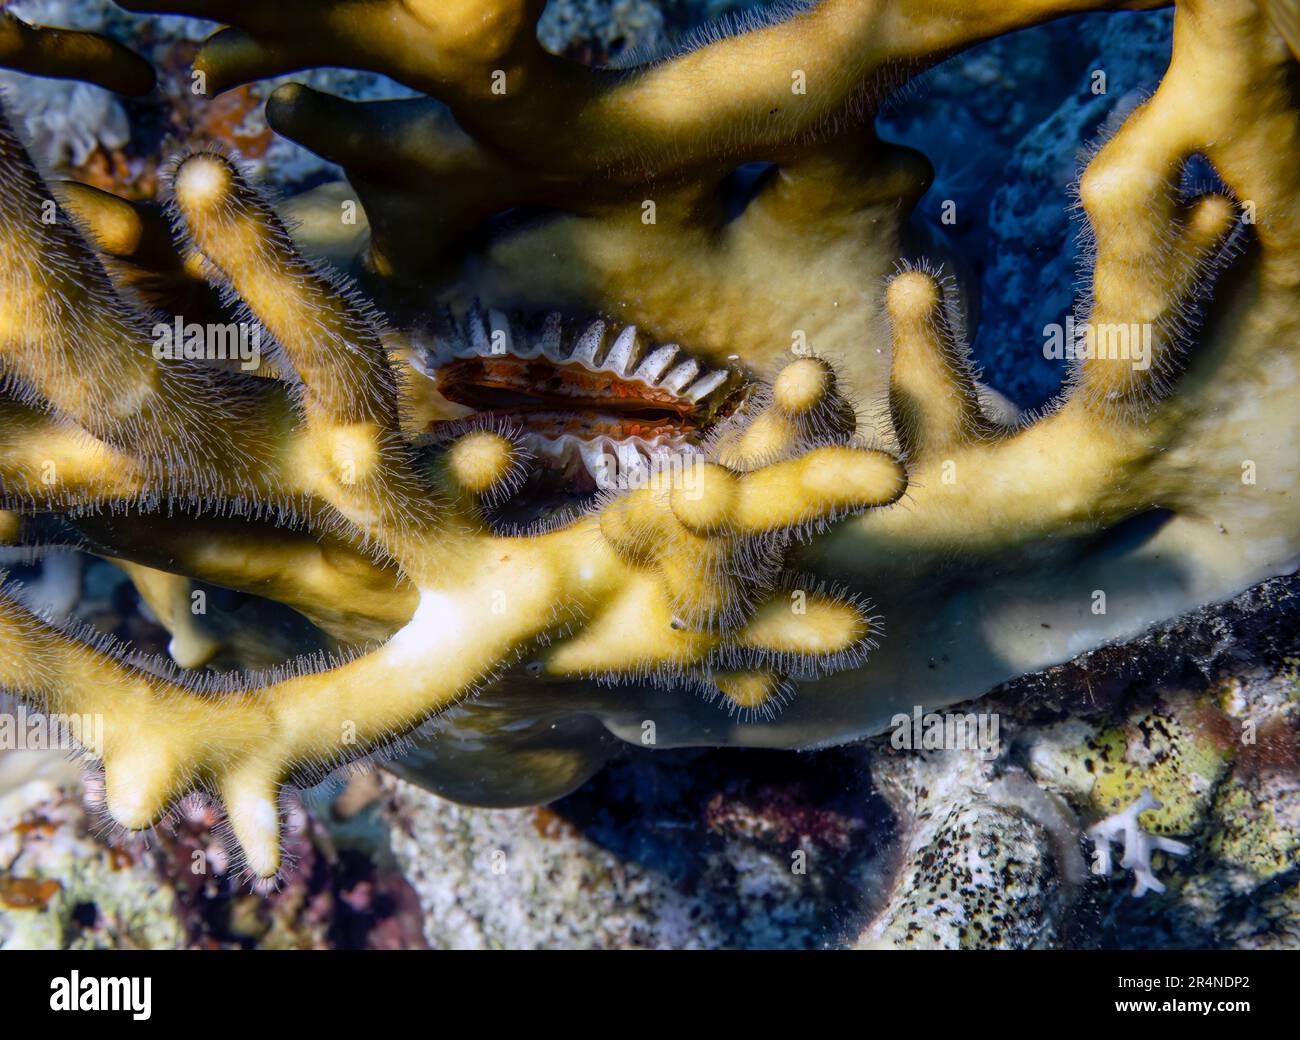 A small oyster hidden in a piece of Fire Coral in the Red Sea, Egypt Stock Photo